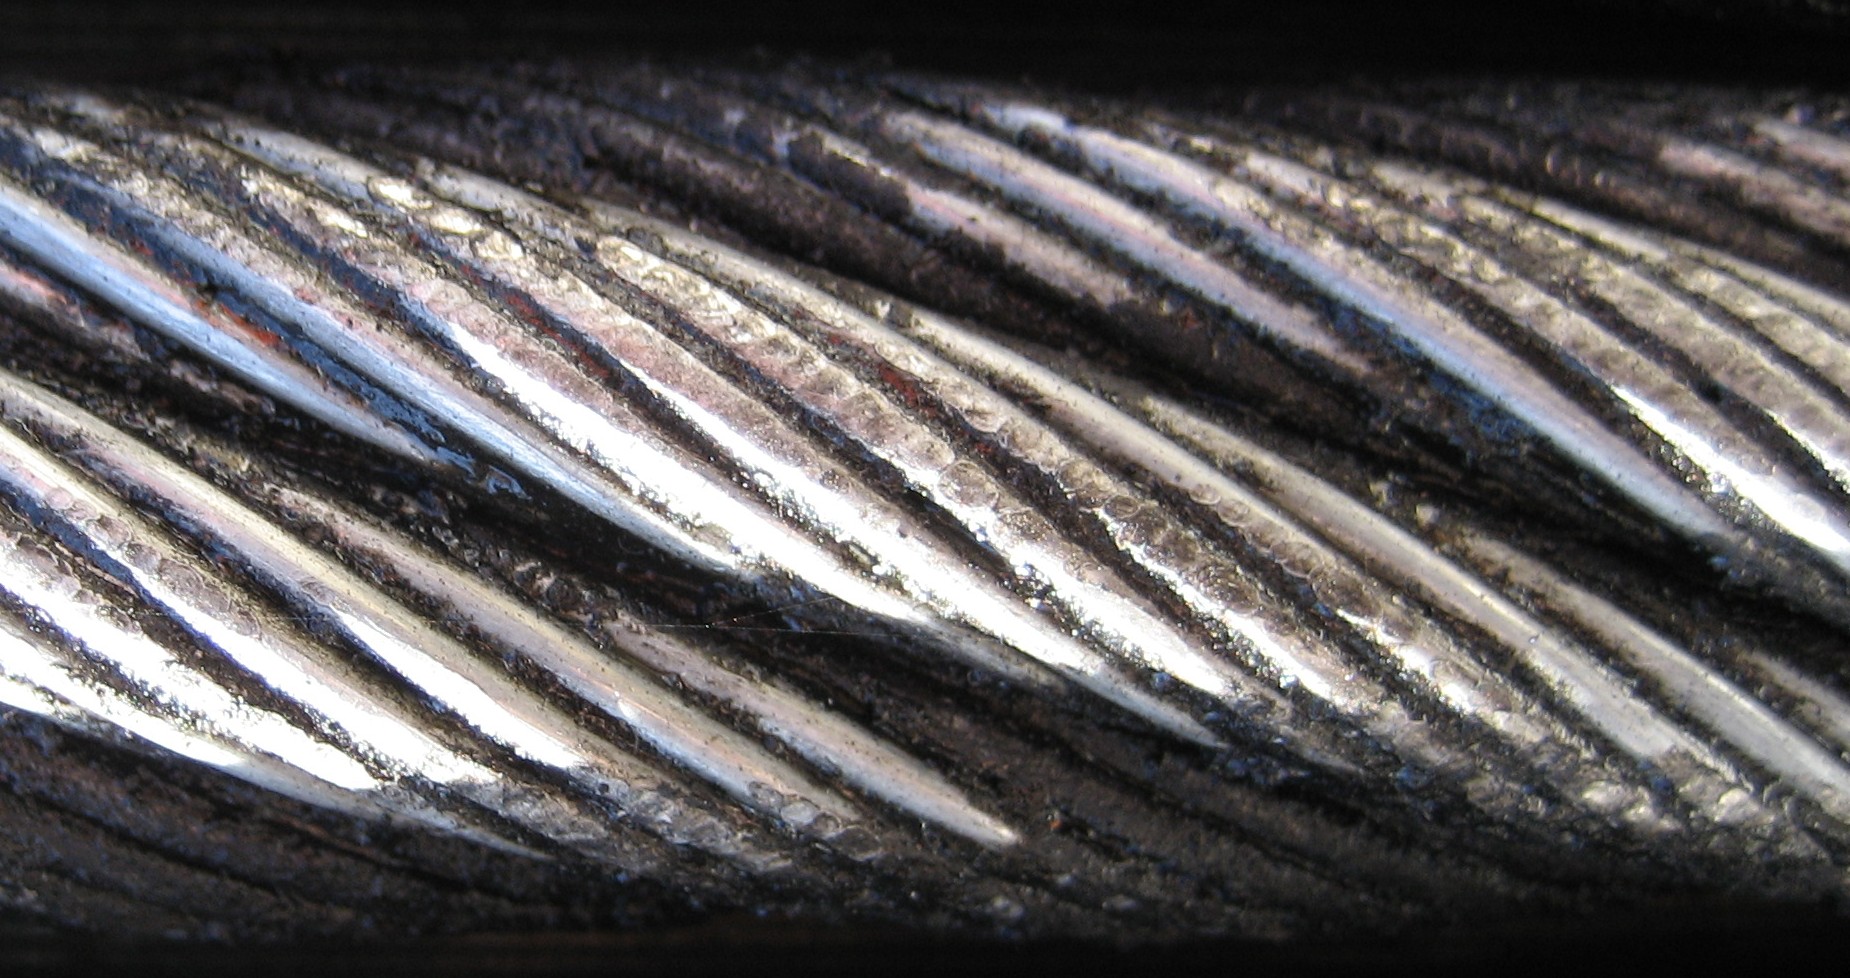 File:Rhll wire rope.jpg - Wikimedia Commons